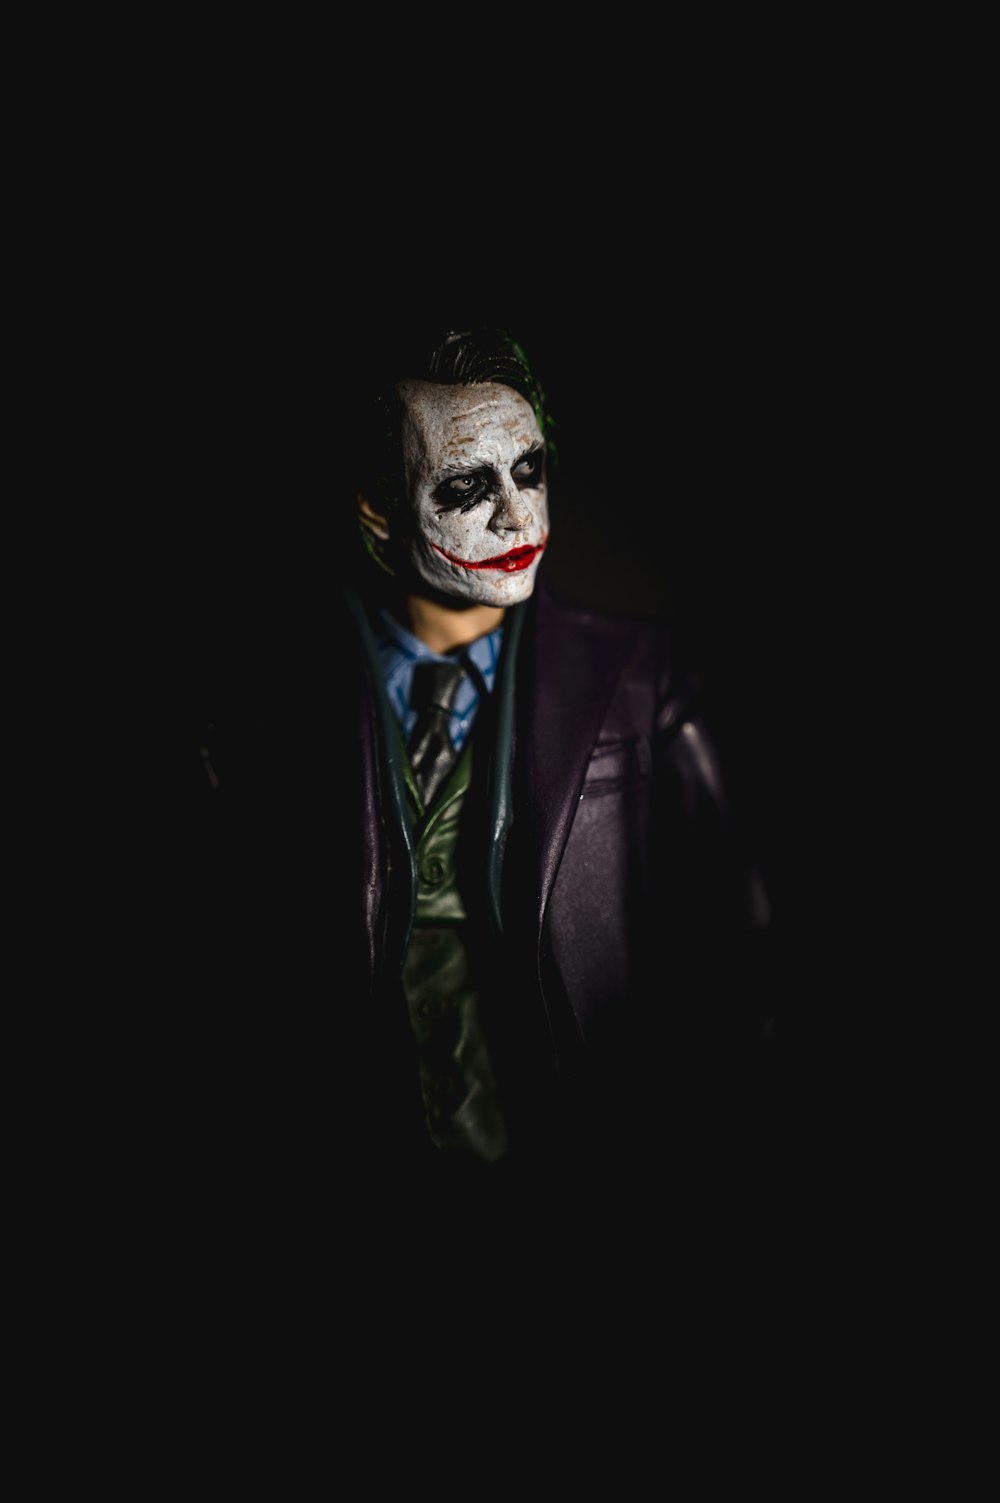 Top 999+ joker images download – Amazing Collection joker images download Full 4K